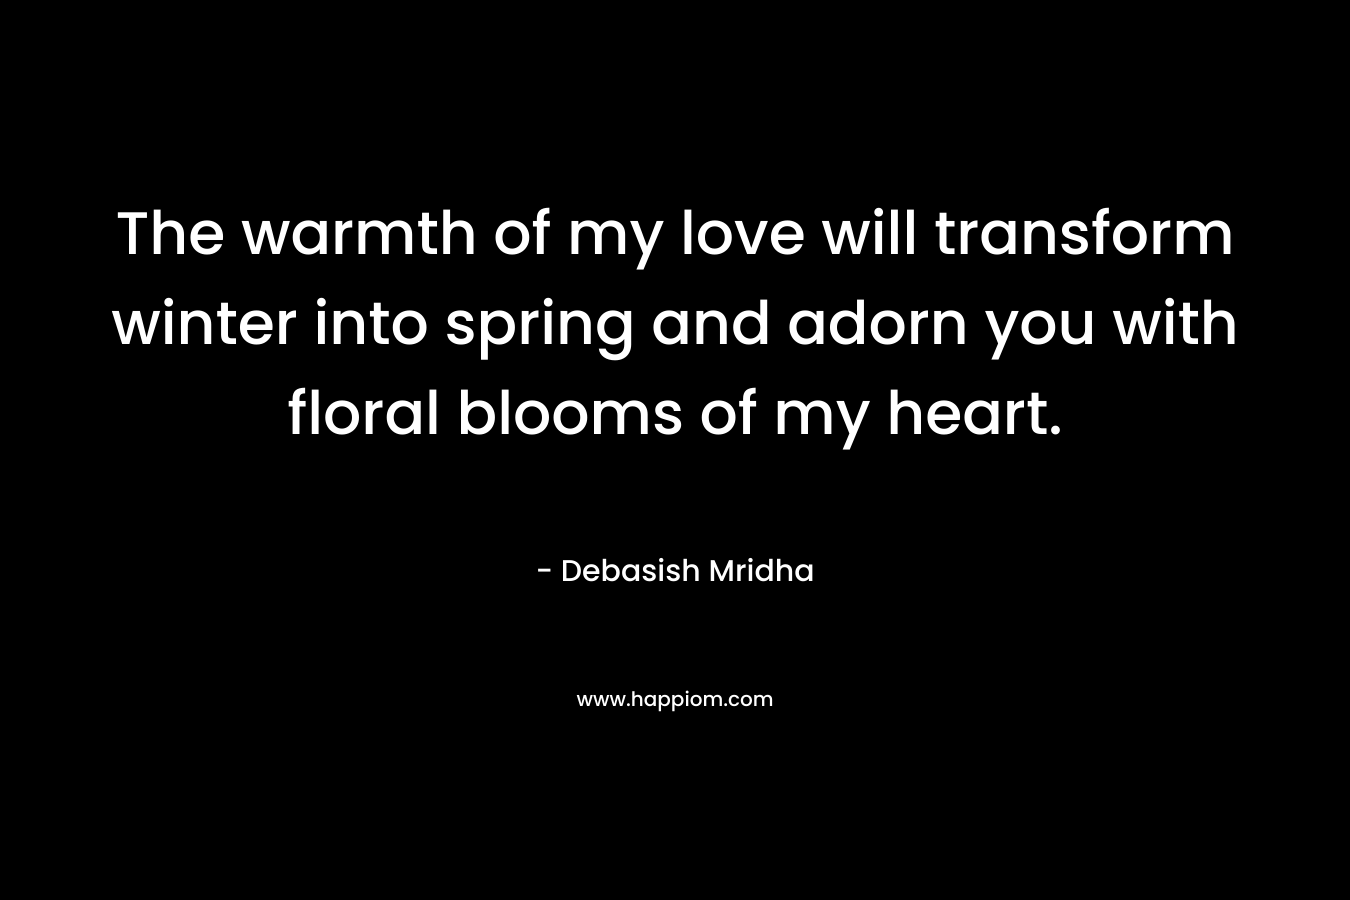 The warmth of my love will transform winter into spring and adorn you with floral blooms of my heart.